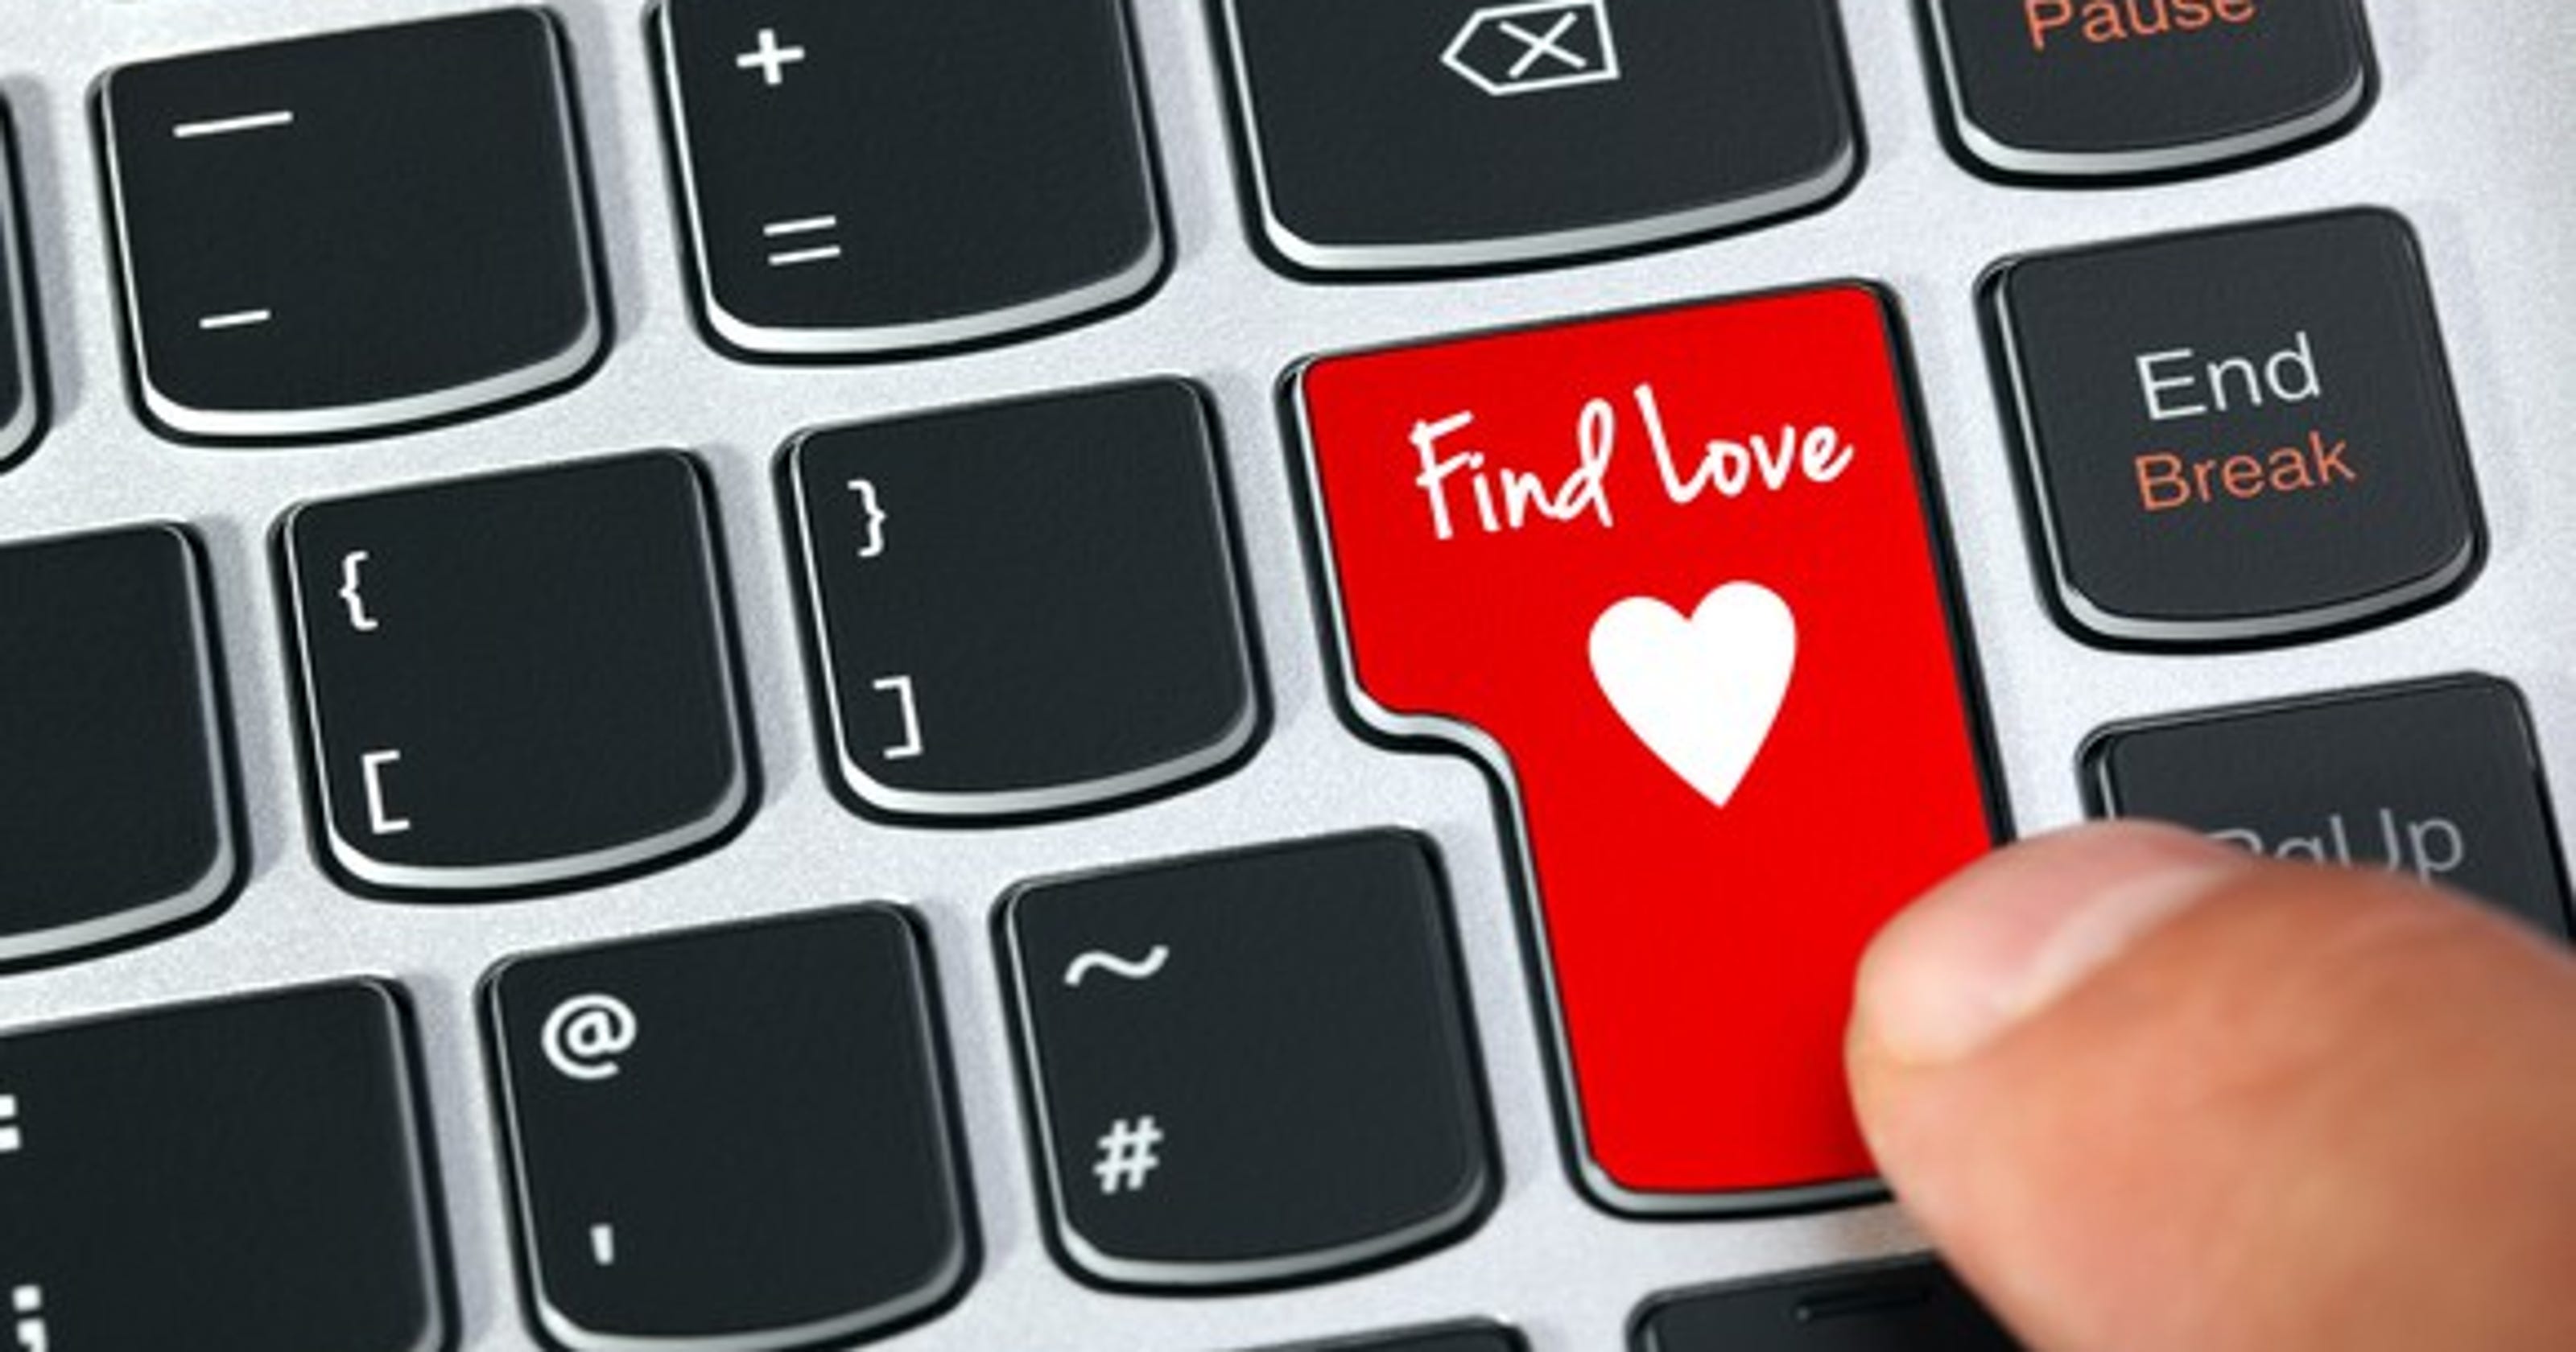 Internet Dating Part 1 - The Profile - Be Fearlessly Authentic